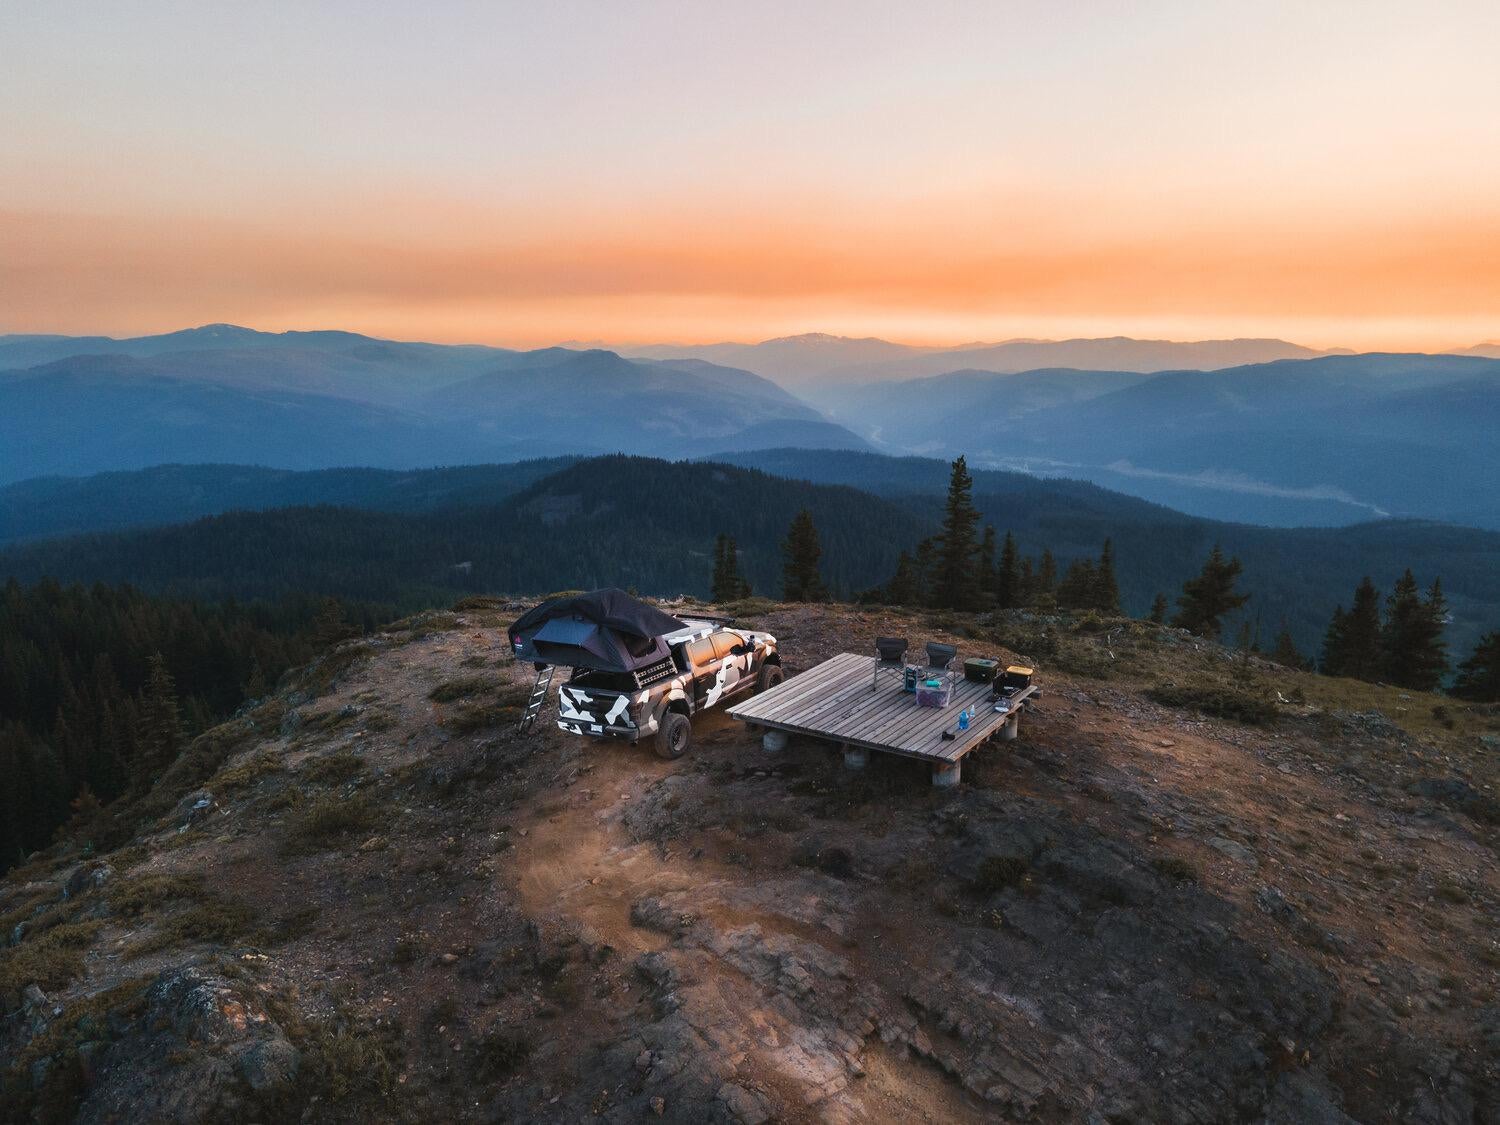 Looking for this specific camping spot in BC : overlanding